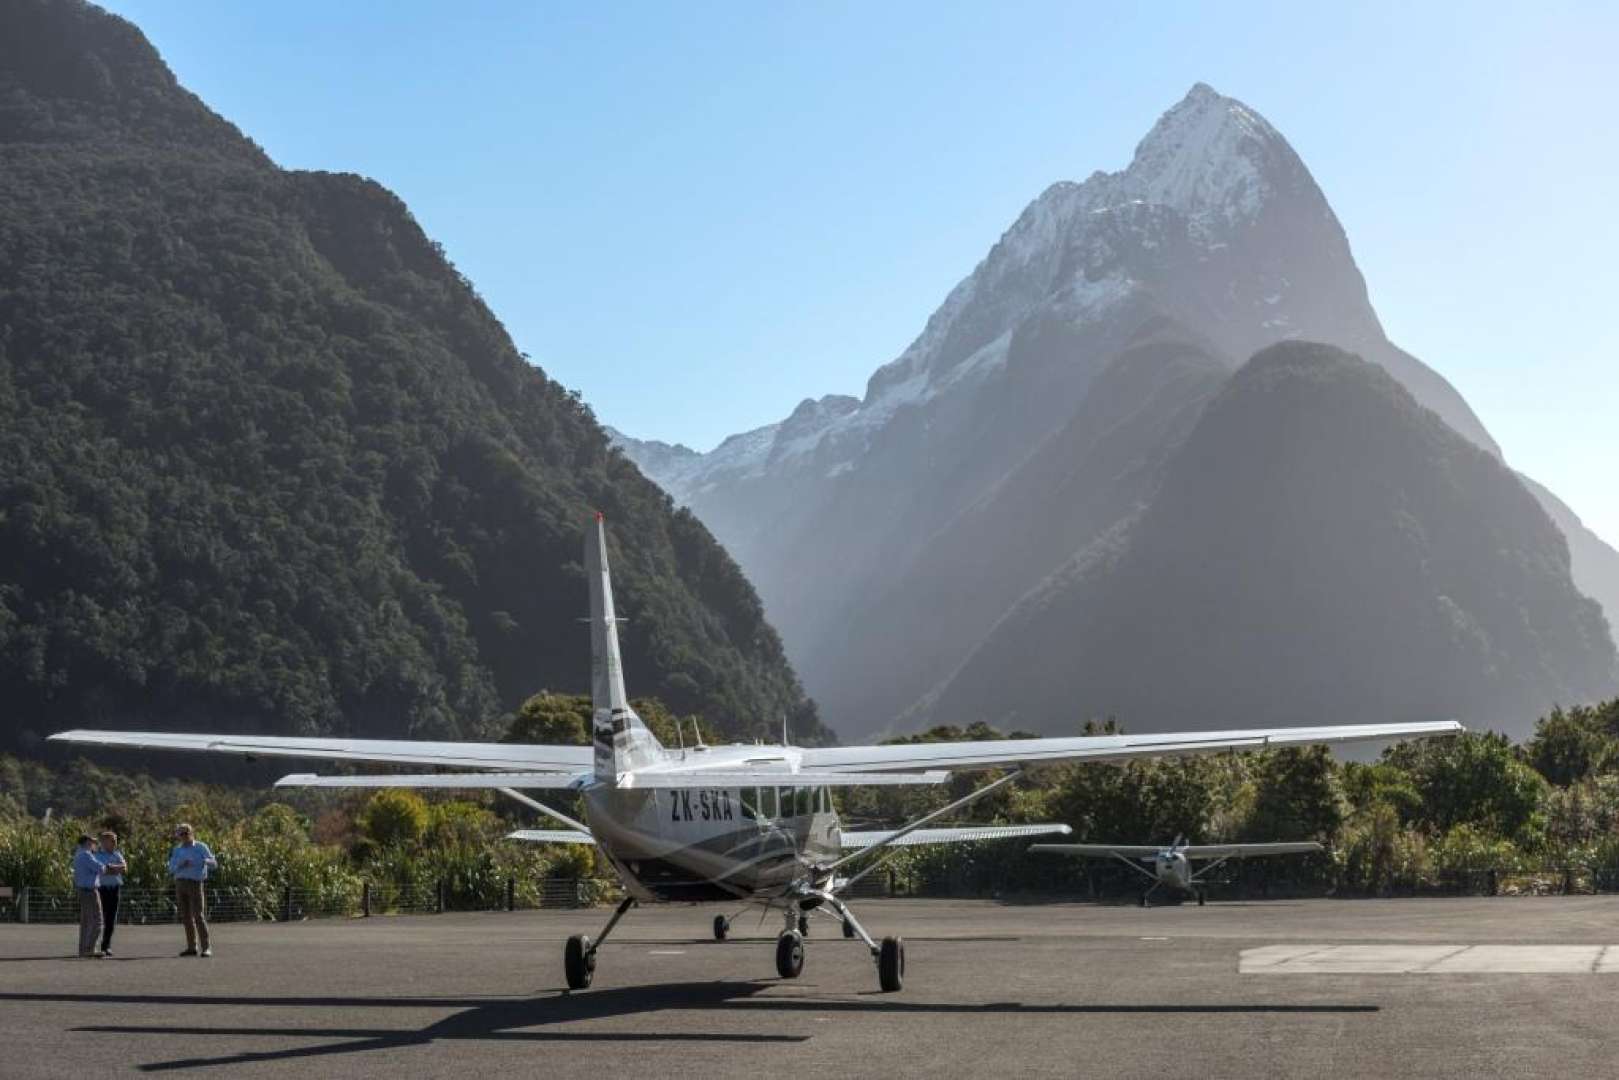 Air Milford landing at the Milford Sound runway with Mitre Peak in the background